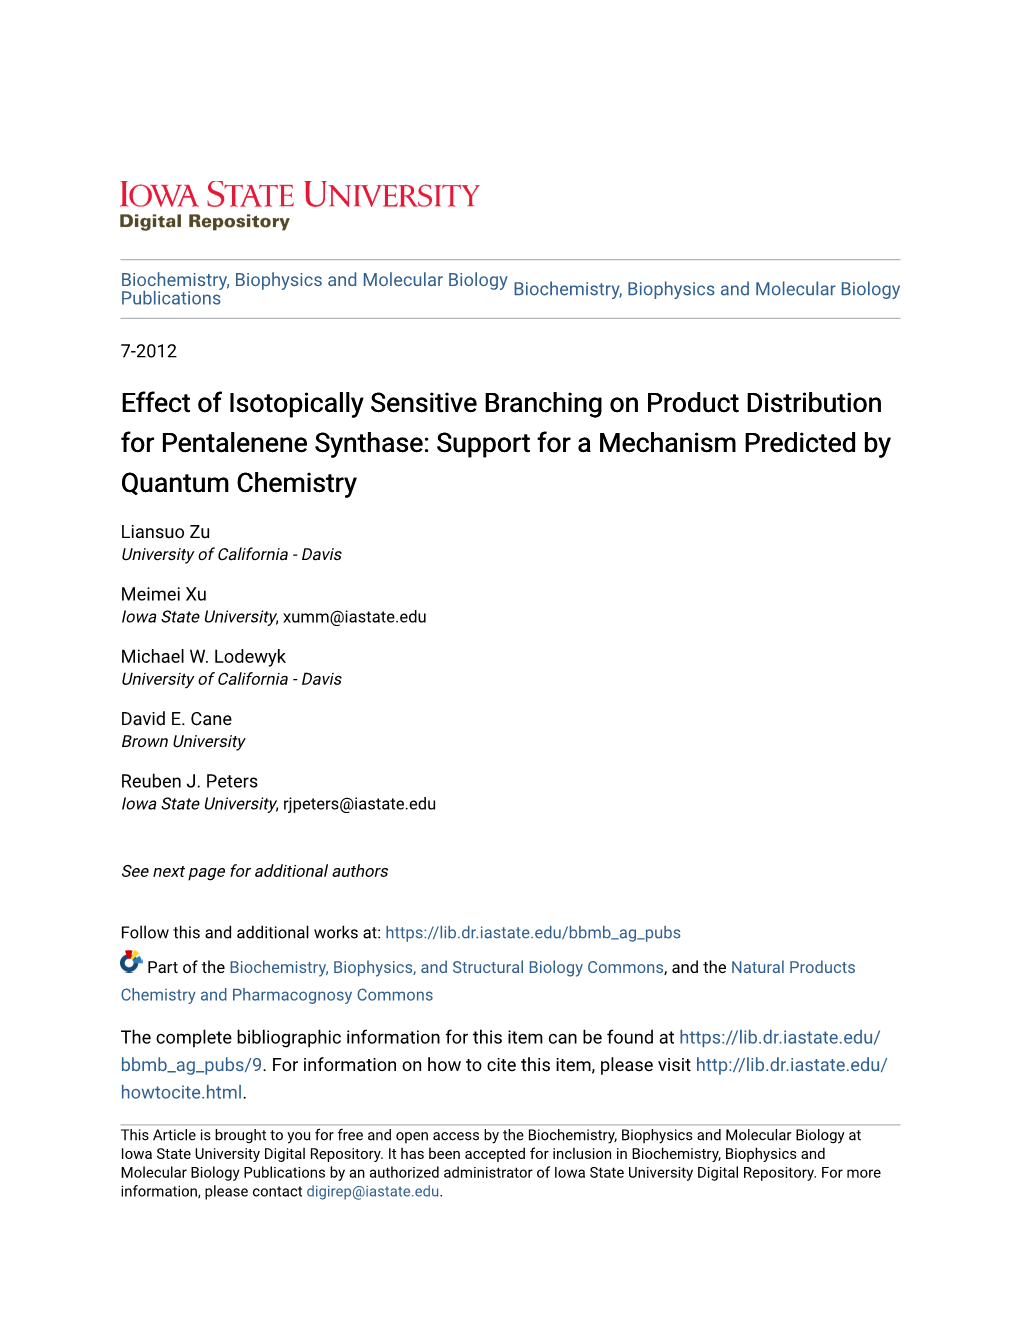 Effect of Isotopically Sensitive Branching on Product Distribution for Pentalenene Synthase: Support for a Mechanism Predicted by Quantum Chemistry